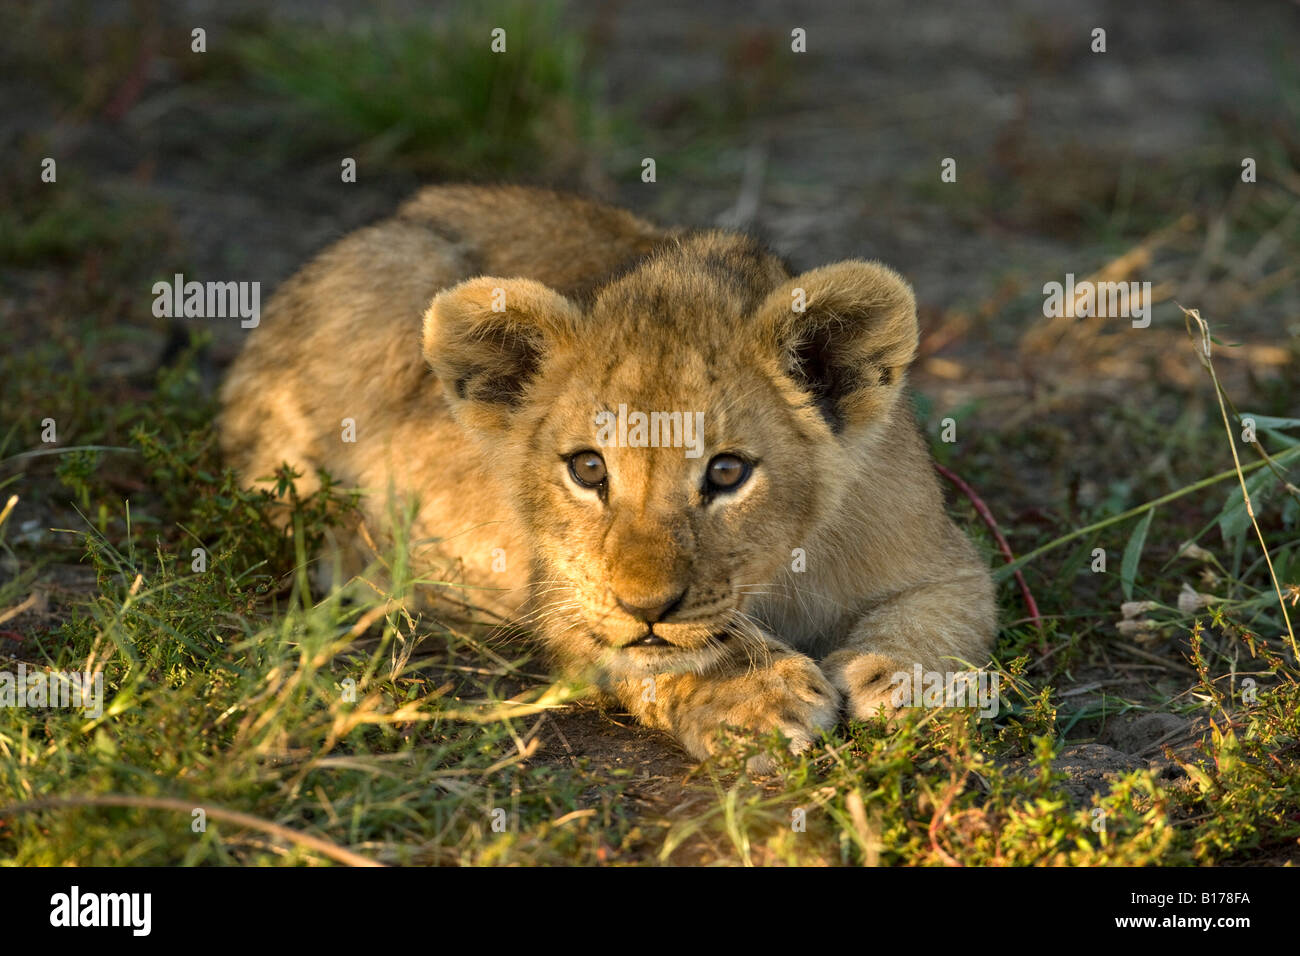 Closeup wild baby lion cub, cute innocent alert and playful sunlit face lying in grass paws together ready to pounce Moremi Okavango Delta Botswana Stock Photo